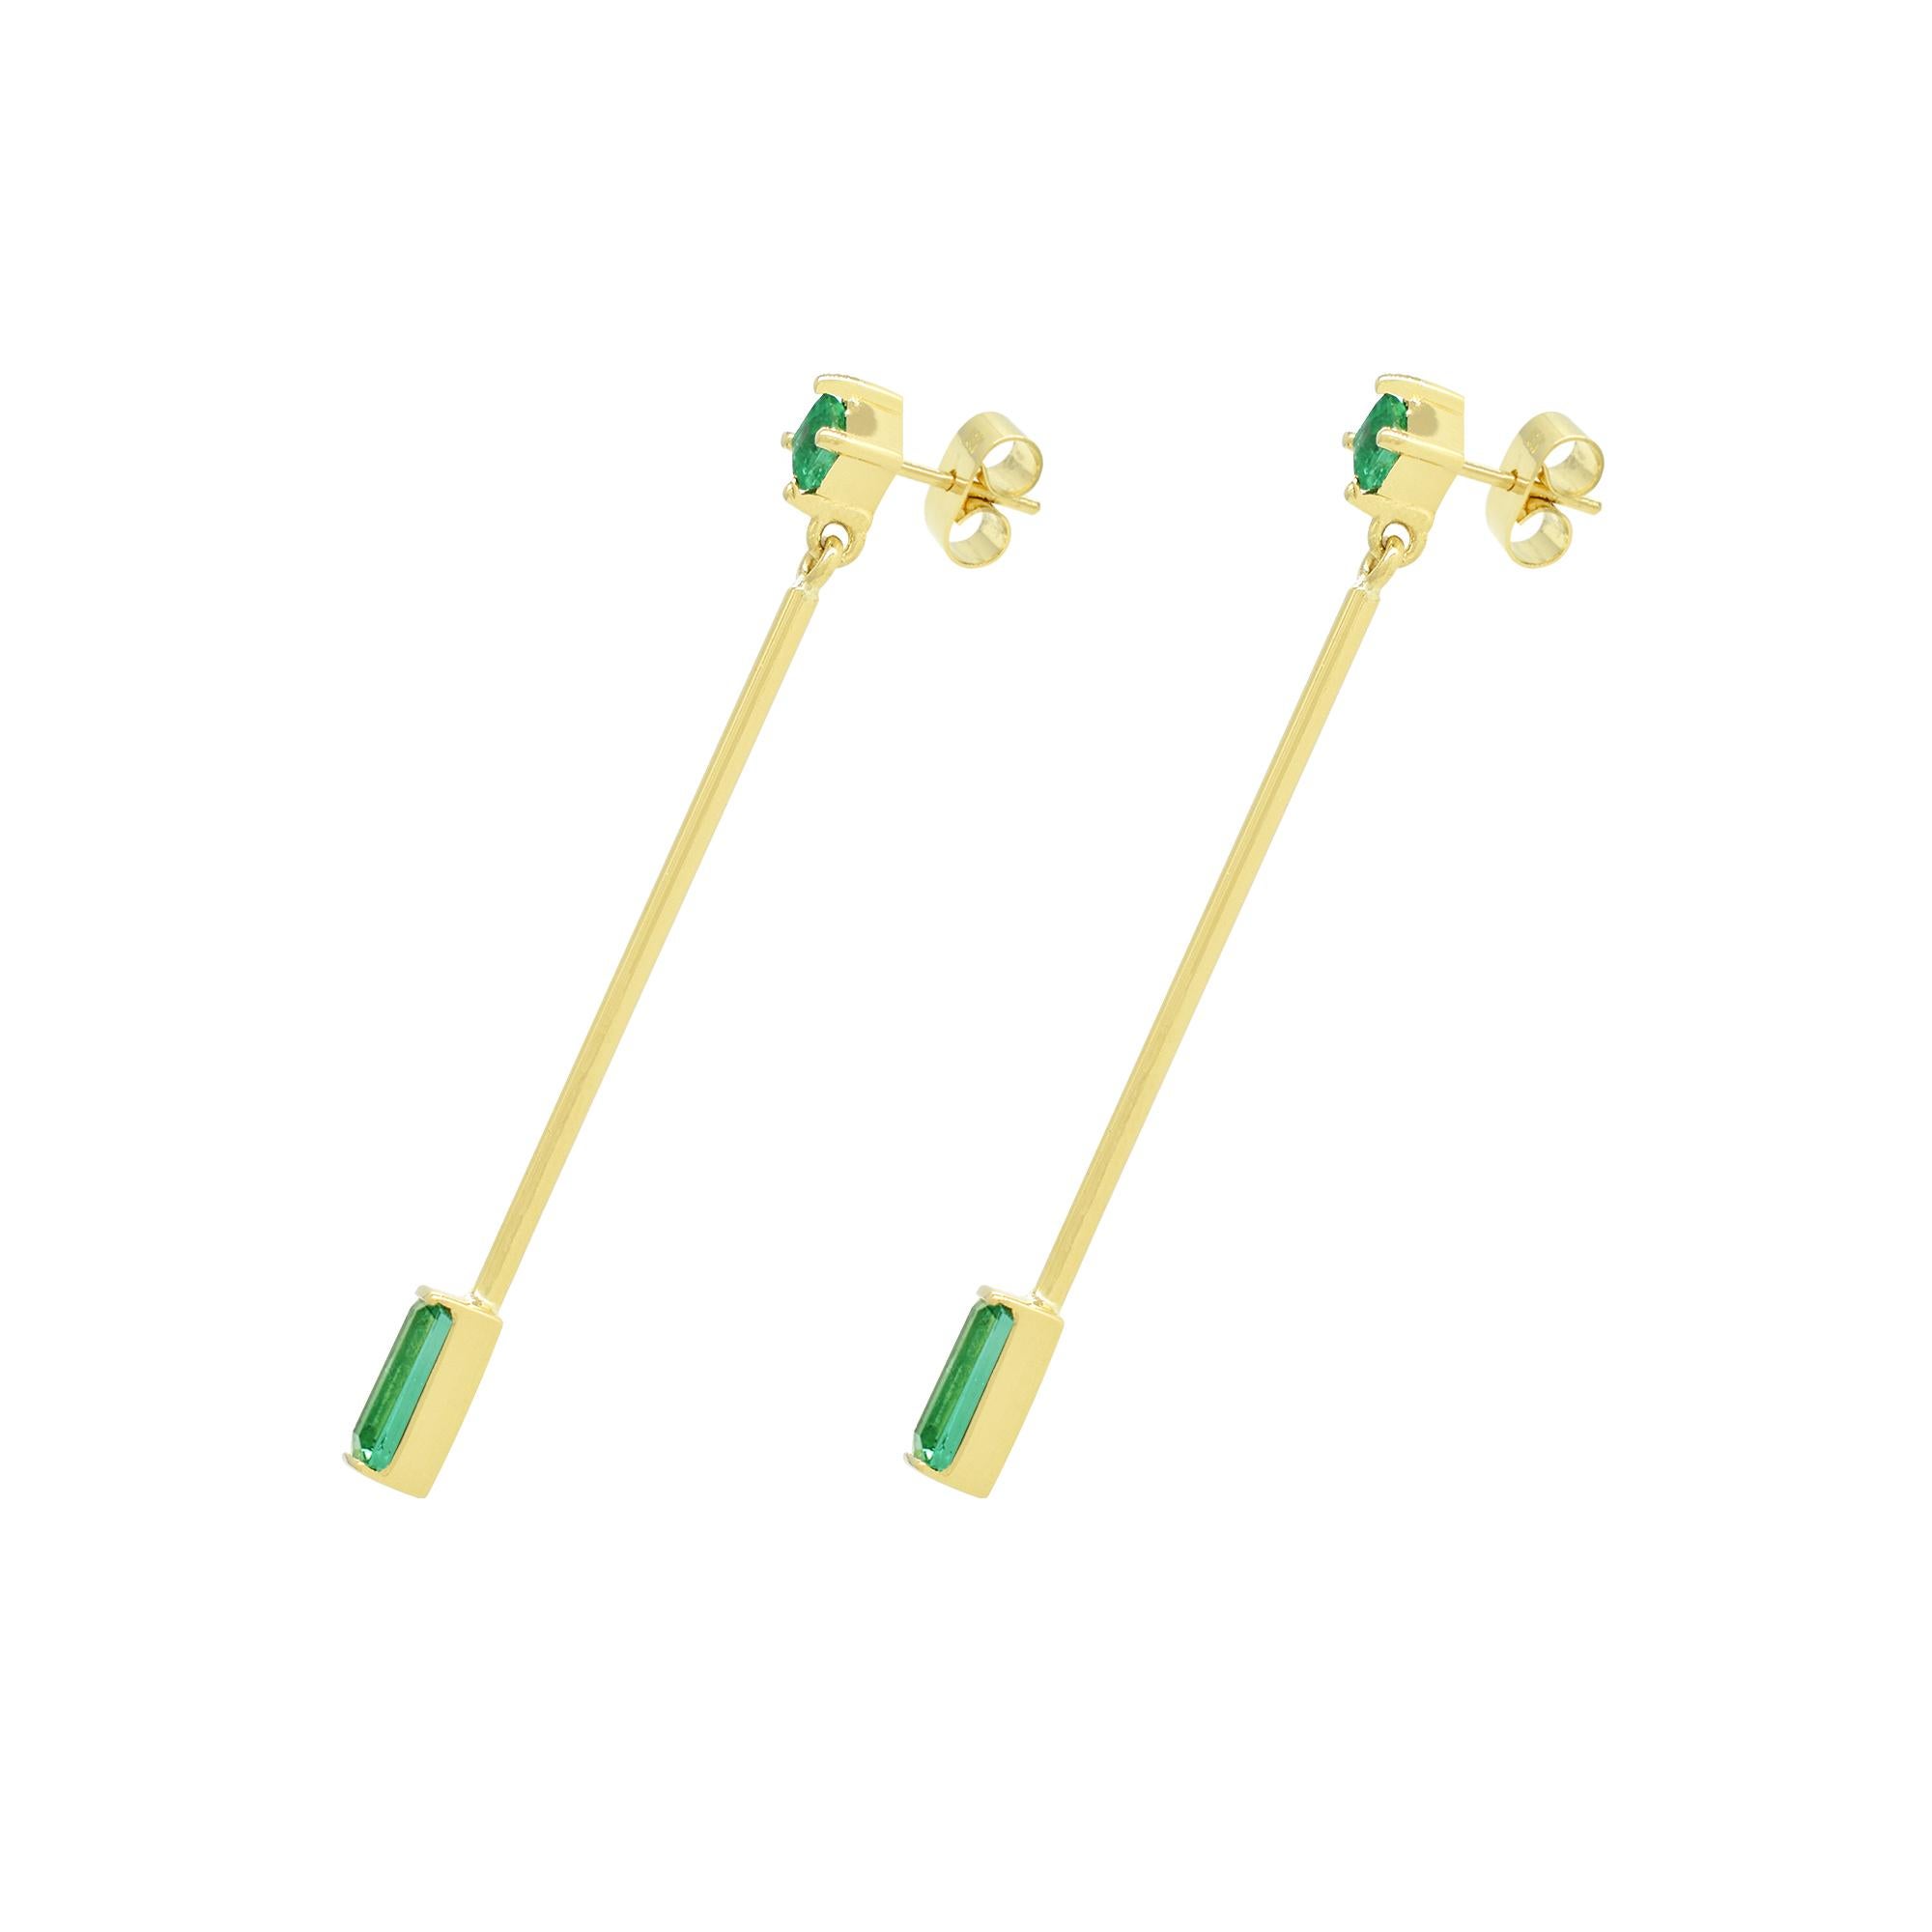 Emerald drop earrings in 18K yellow gold with emerald and baguette cut natural Colombian emeralds custom made in a thin, delicate and feminine dangle earrings design. A fantastic selection of 4 small emeralds with beautiful and vivid green color set